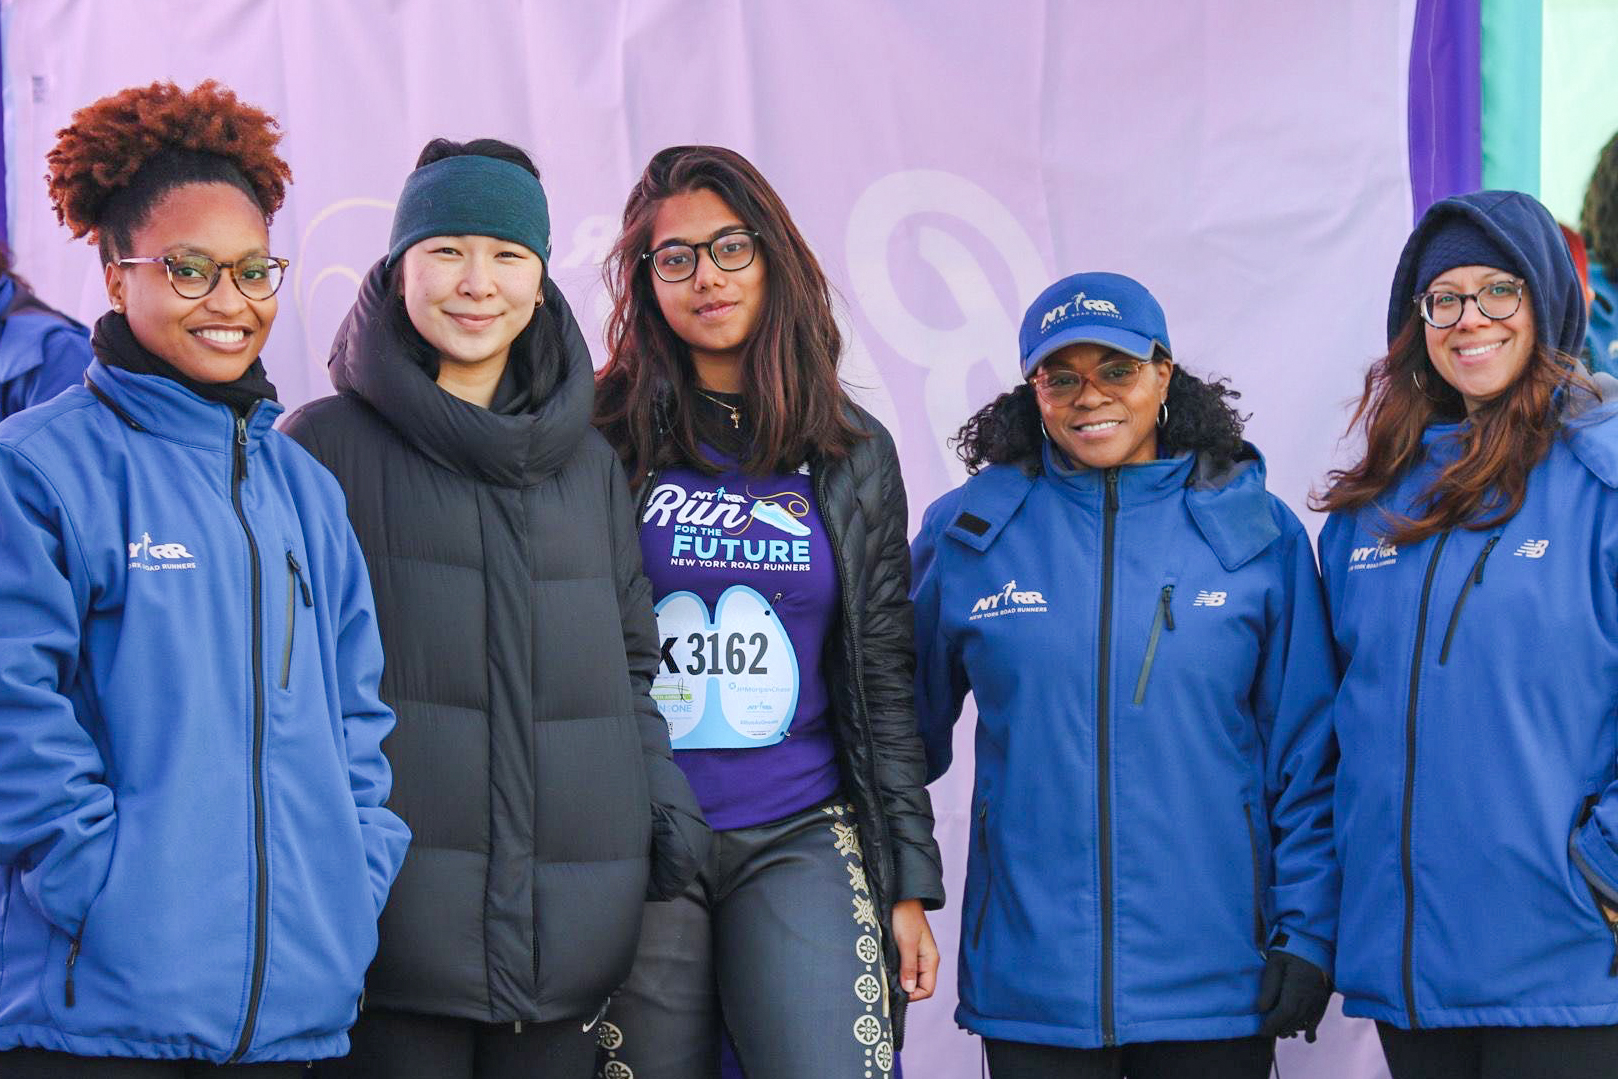 Two RFTF alumnae with NYRR staff inside tent at Run as One race